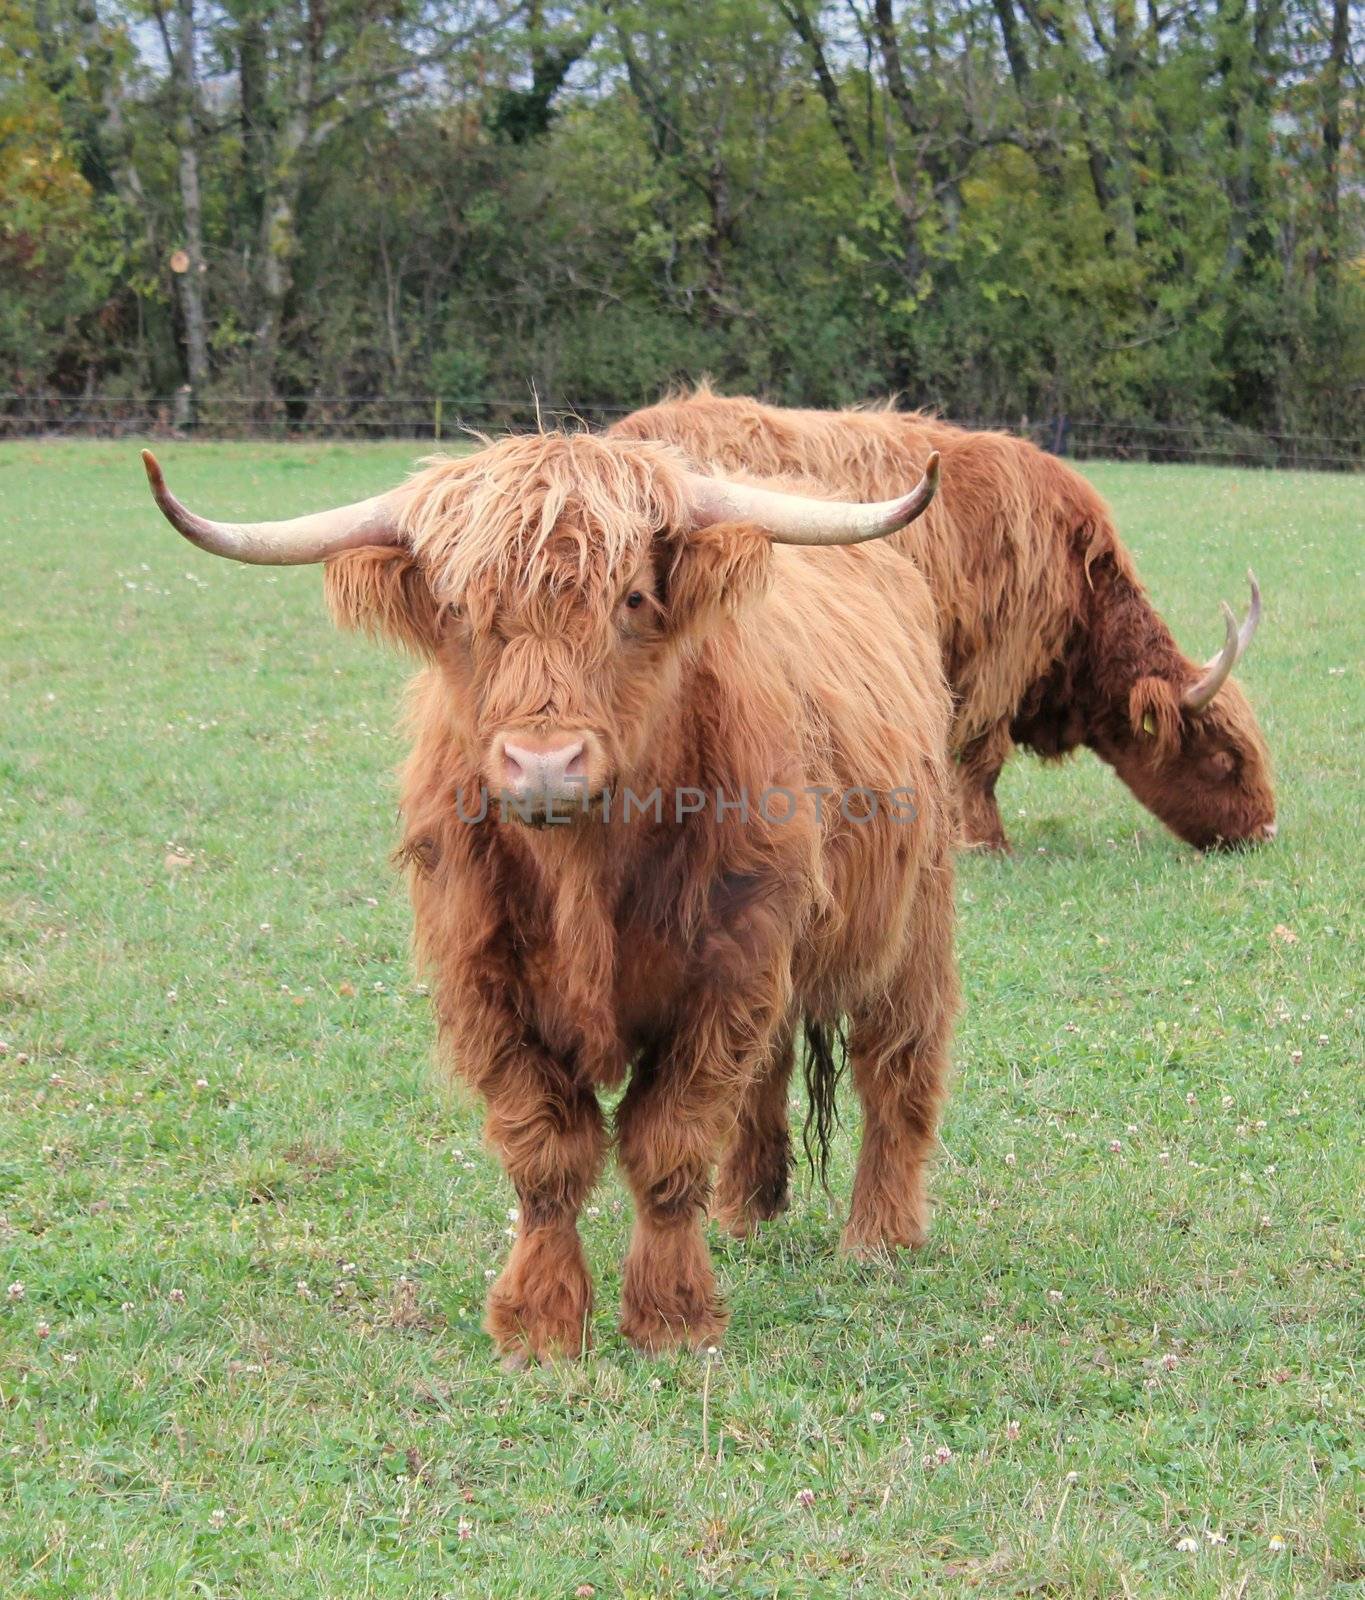 Brown scottish cows with their big horns in a meadow